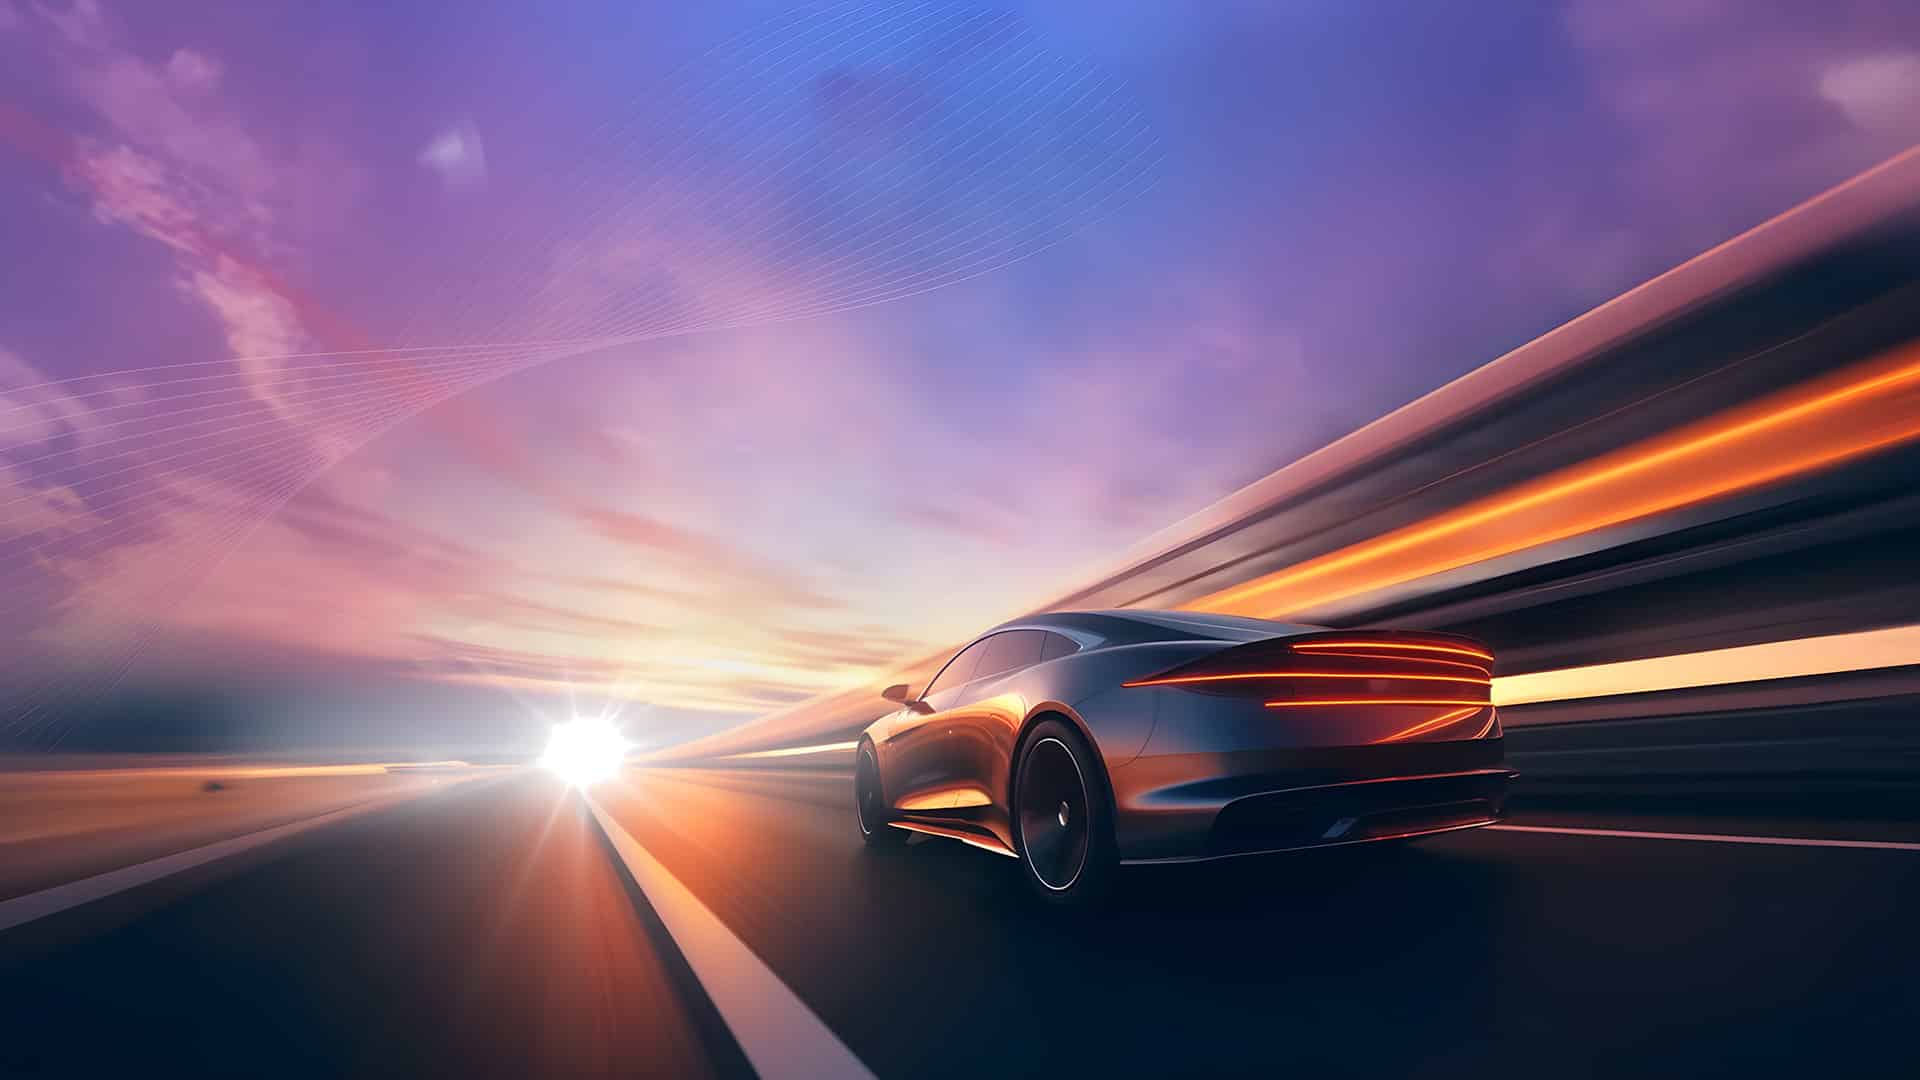 Back view of futuristic looking car on expressway driving towards sunset. Subdued background tones in purple and orange shades.